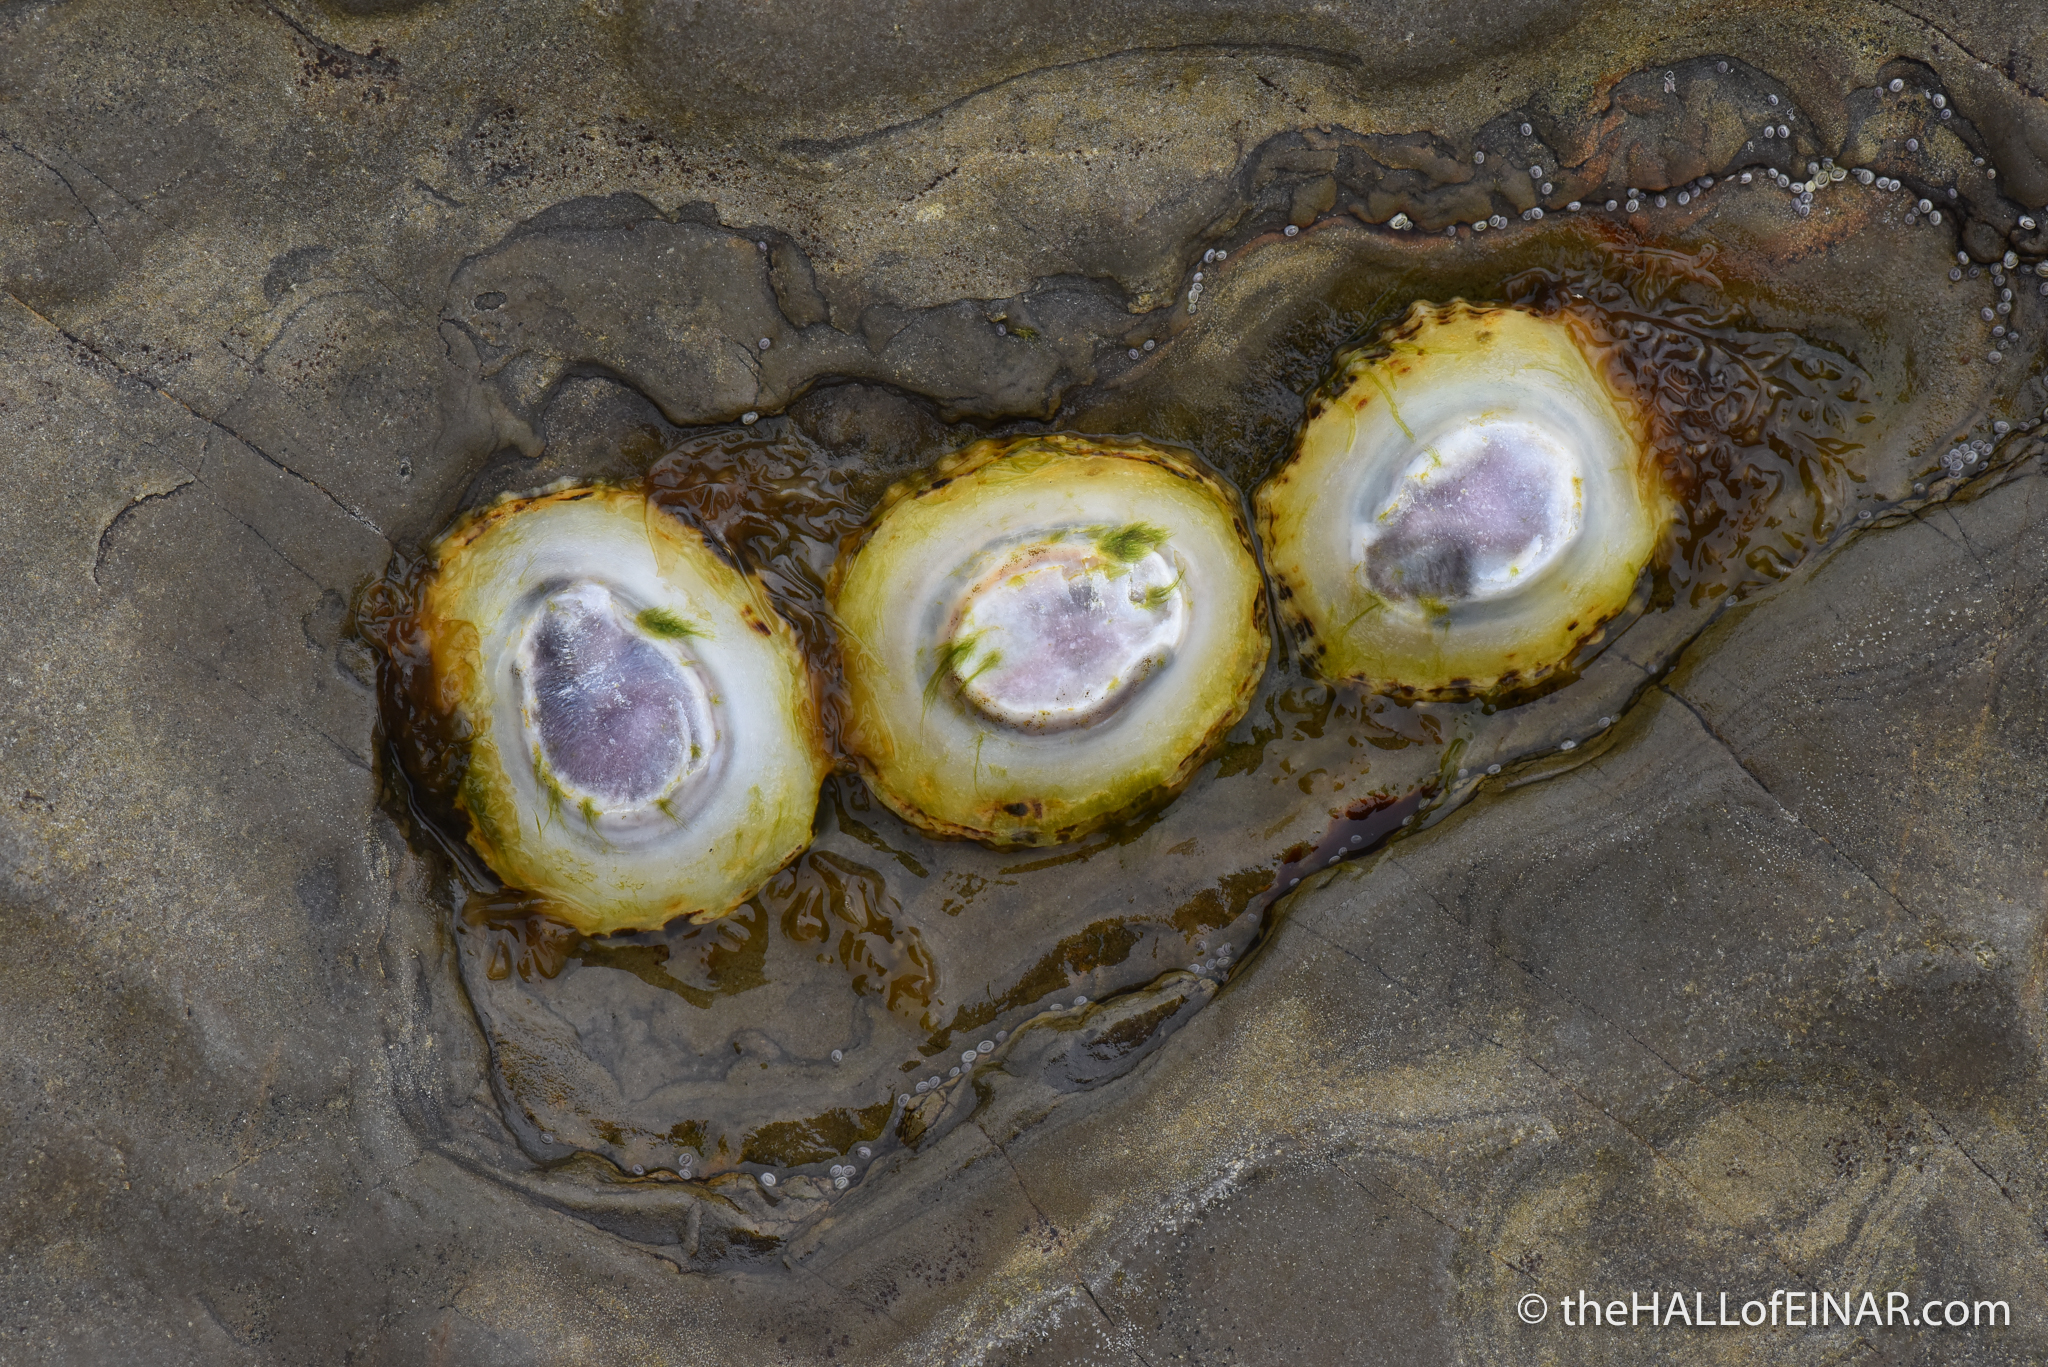 Three Limpets - photograph (c) 2016 David Bailey (not the)